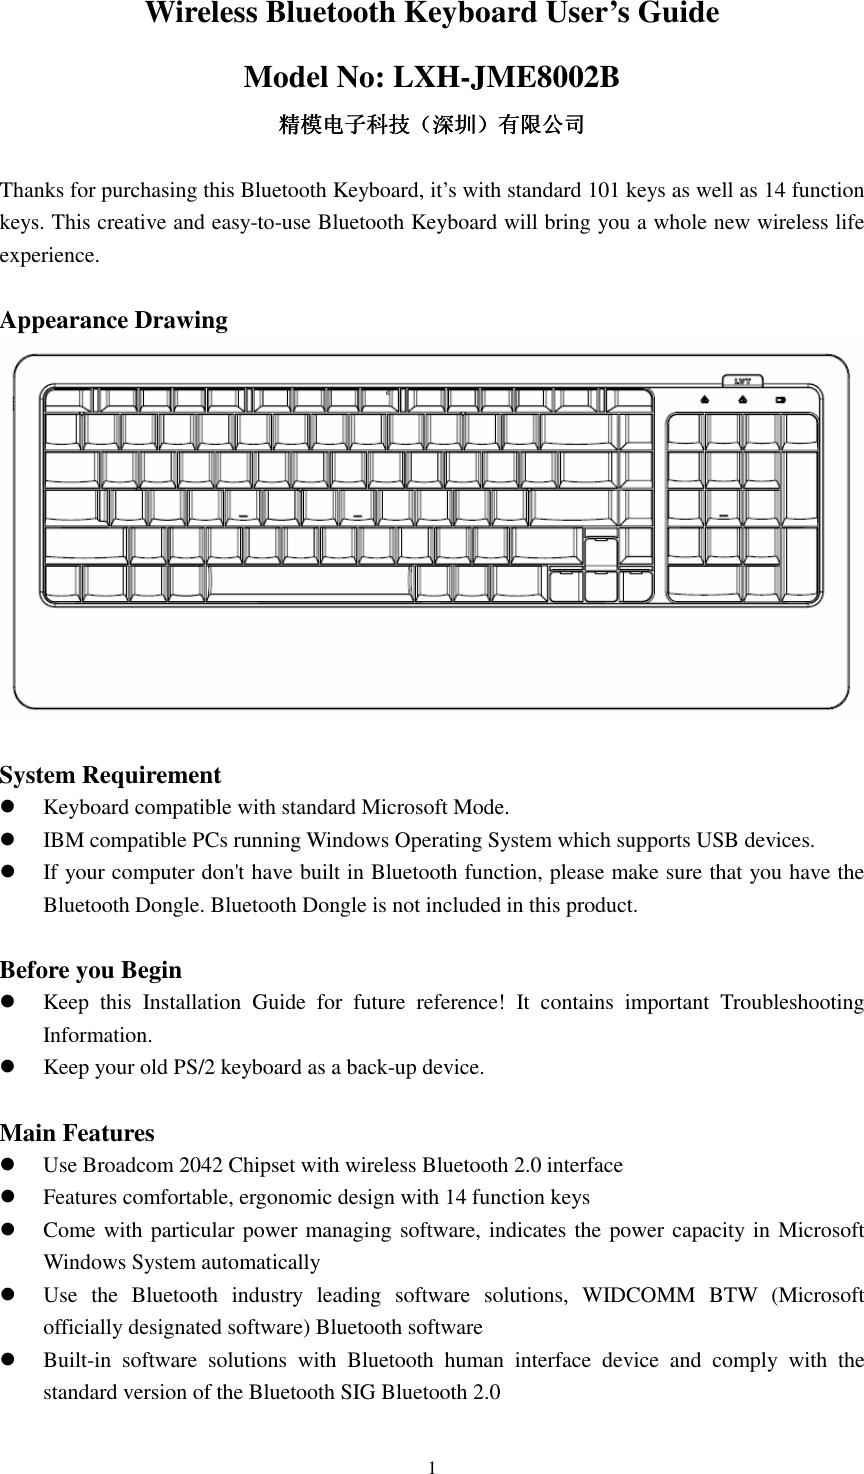  1Wireless Bluetooth Keyboard User’s Guide Model No: LXH-JME8002B 精模电子科技精模电子科技精模电子科技精模电子科技（（（（深圳深圳深圳深圳））））有限公司有限公司有限公司有限公司  Thanks for purchasing this Bluetooth Keyboard, it’s with standard 101 keys as well as 14 function keys. This creative and easy-to-use Bluetooth Keyboard will bring you a whole new wireless life experience.  Appearance Drawing   System Requirement  Keyboard compatible with standard Microsoft Mode.  IBM compatible PCs running Windows Operating System which supports USB devices.  If your computer don&apos;t have built in Bluetooth function, please make sure that you have the Bluetooth Dongle. Bluetooth Dongle is not included in this product.  Before you Begin  Keep  this  Installation  Guide  for  future  reference!  It  contains  important  Troubleshooting Information.  Keep your old PS/2 keyboard as a back-up device.  Main Features  Use Broadcom 2042 Chipset with wireless Bluetooth 2.0 interface  Features comfortable, ergonomic design with 14 function keys  Come with particular power managing software, indicates the power capacity in Microsoft Windows System automatically  Use  the  Bluetooth  industry  leading  software  solutions,  WIDCOMM  BTW  (Microsoft officially designated software) Bluetooth software  Built-in  software  solutions  with  Bluetooth  human  interface  device  and  comply  with  the standard version of the Bluetooth SIG Bluetooth 2.0 